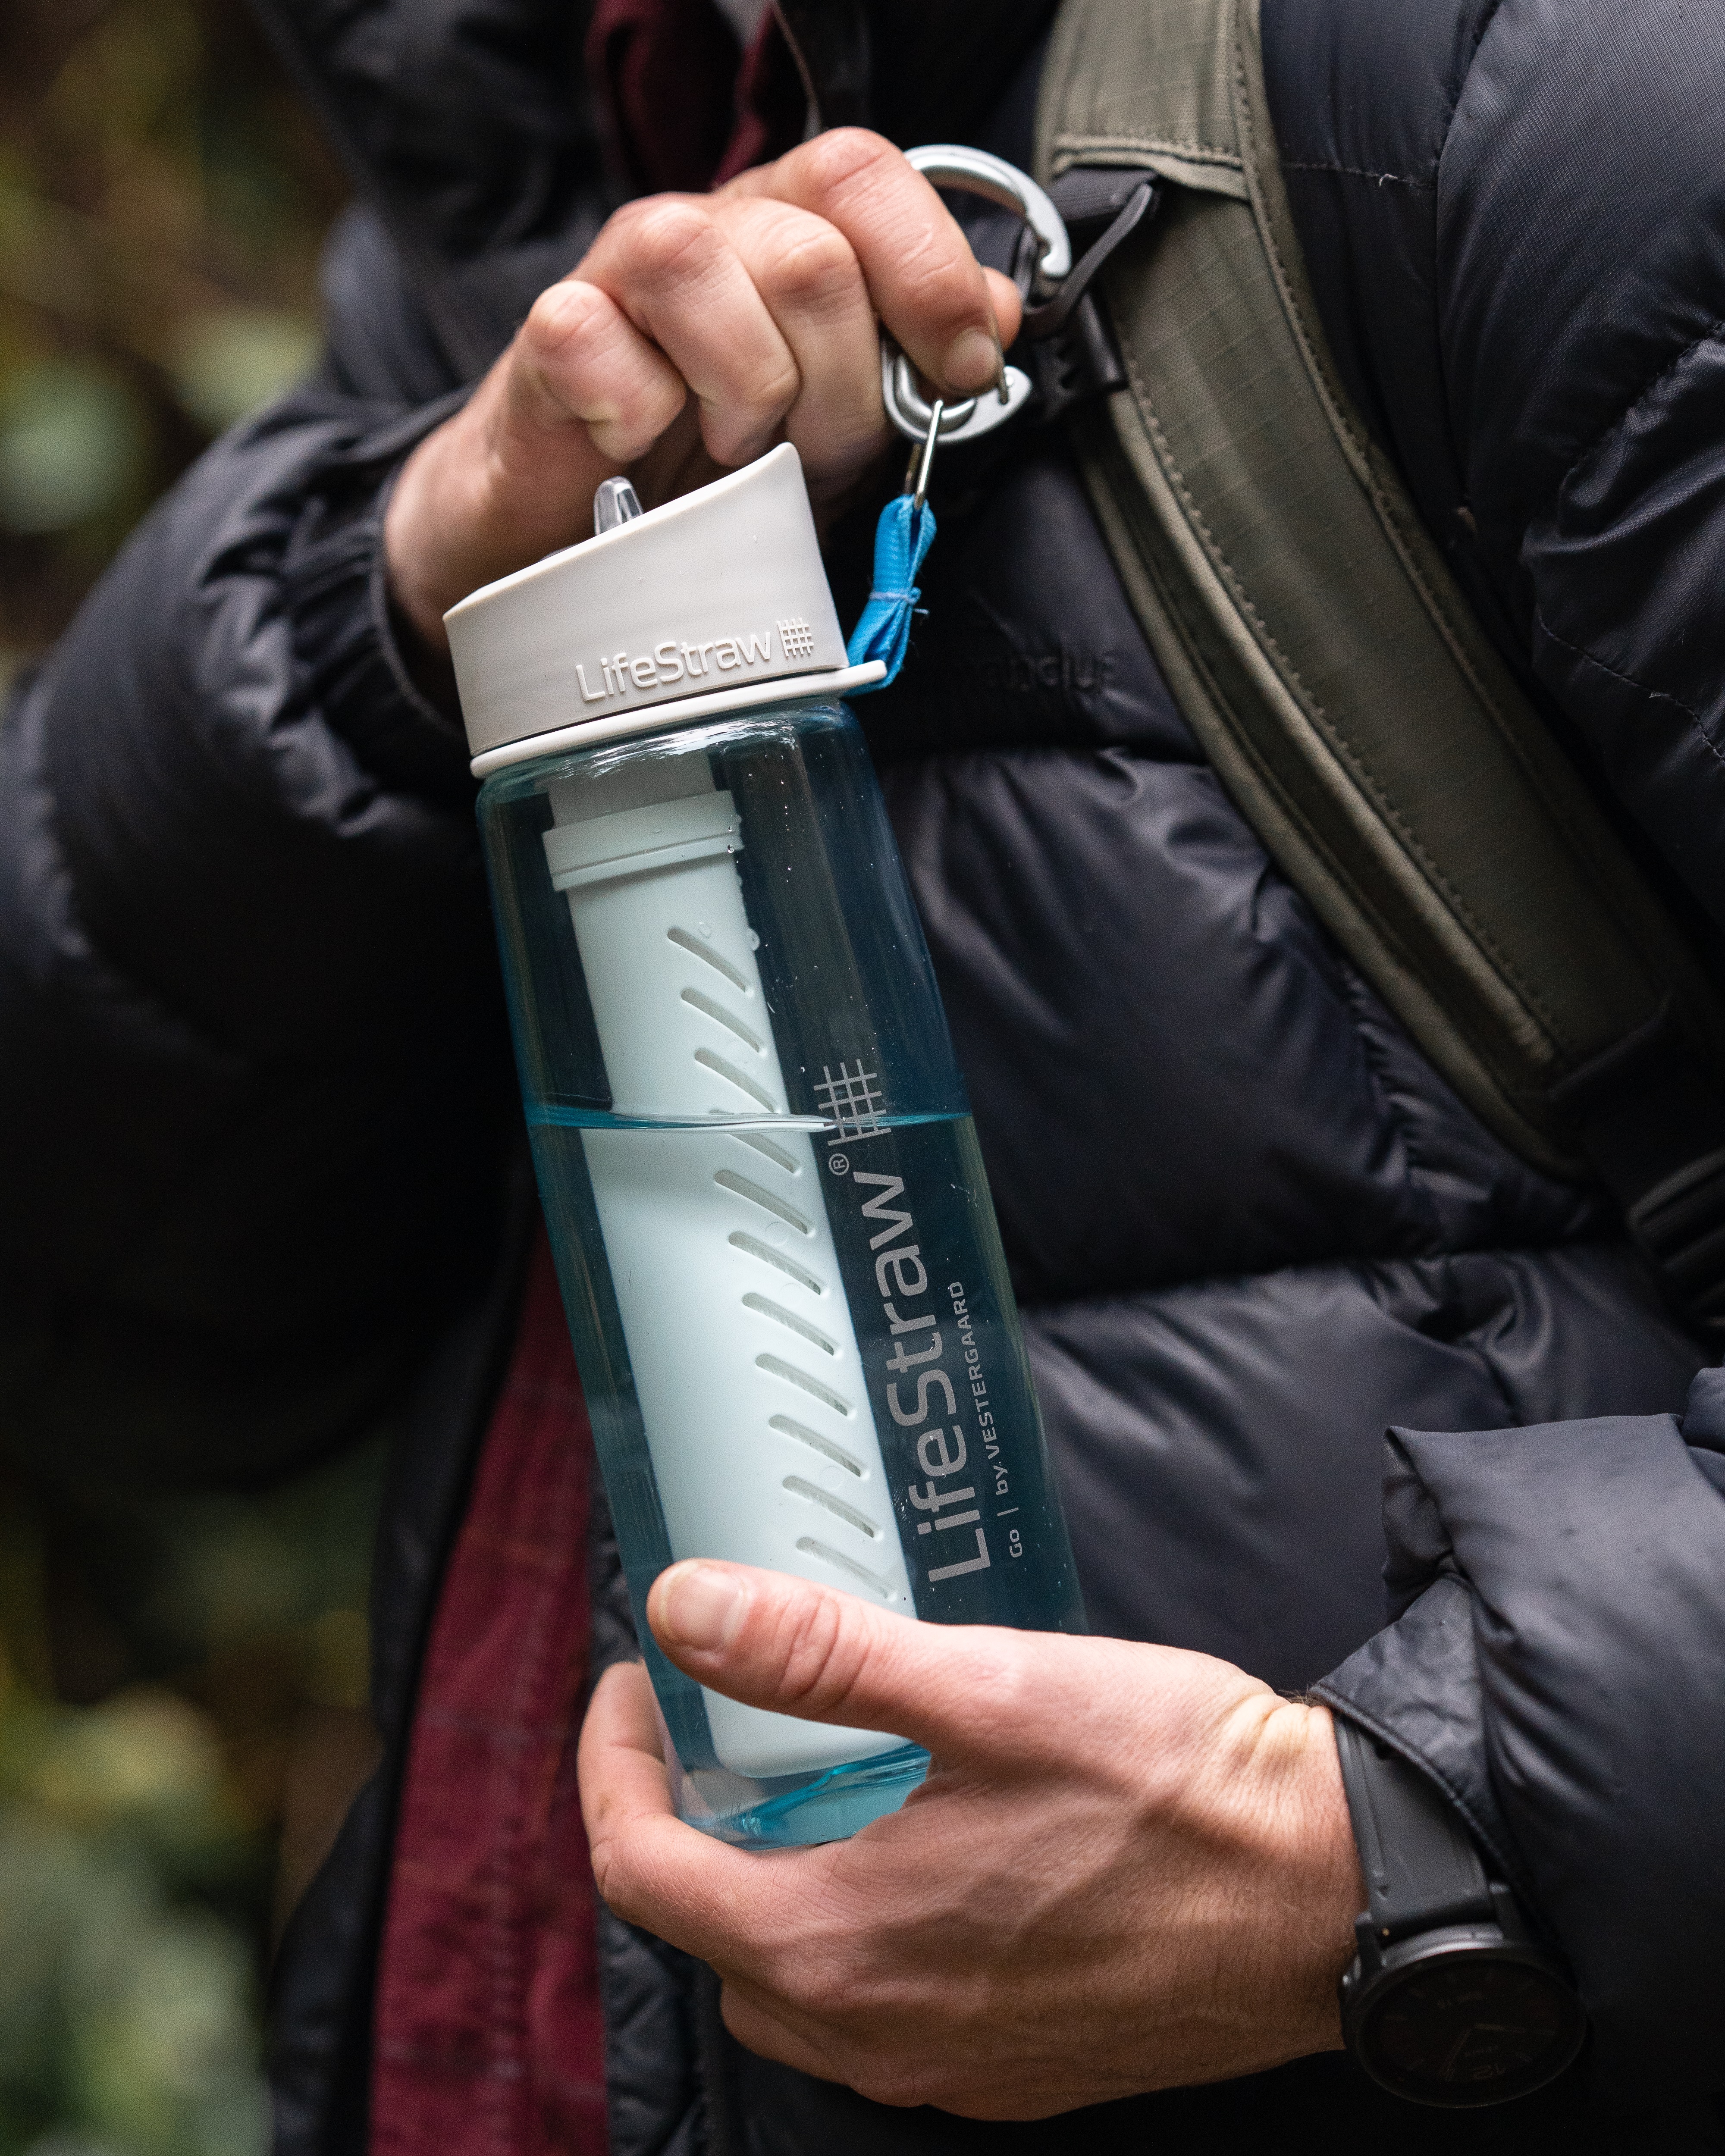 The top 5 benefits of using Lifestraw water filters